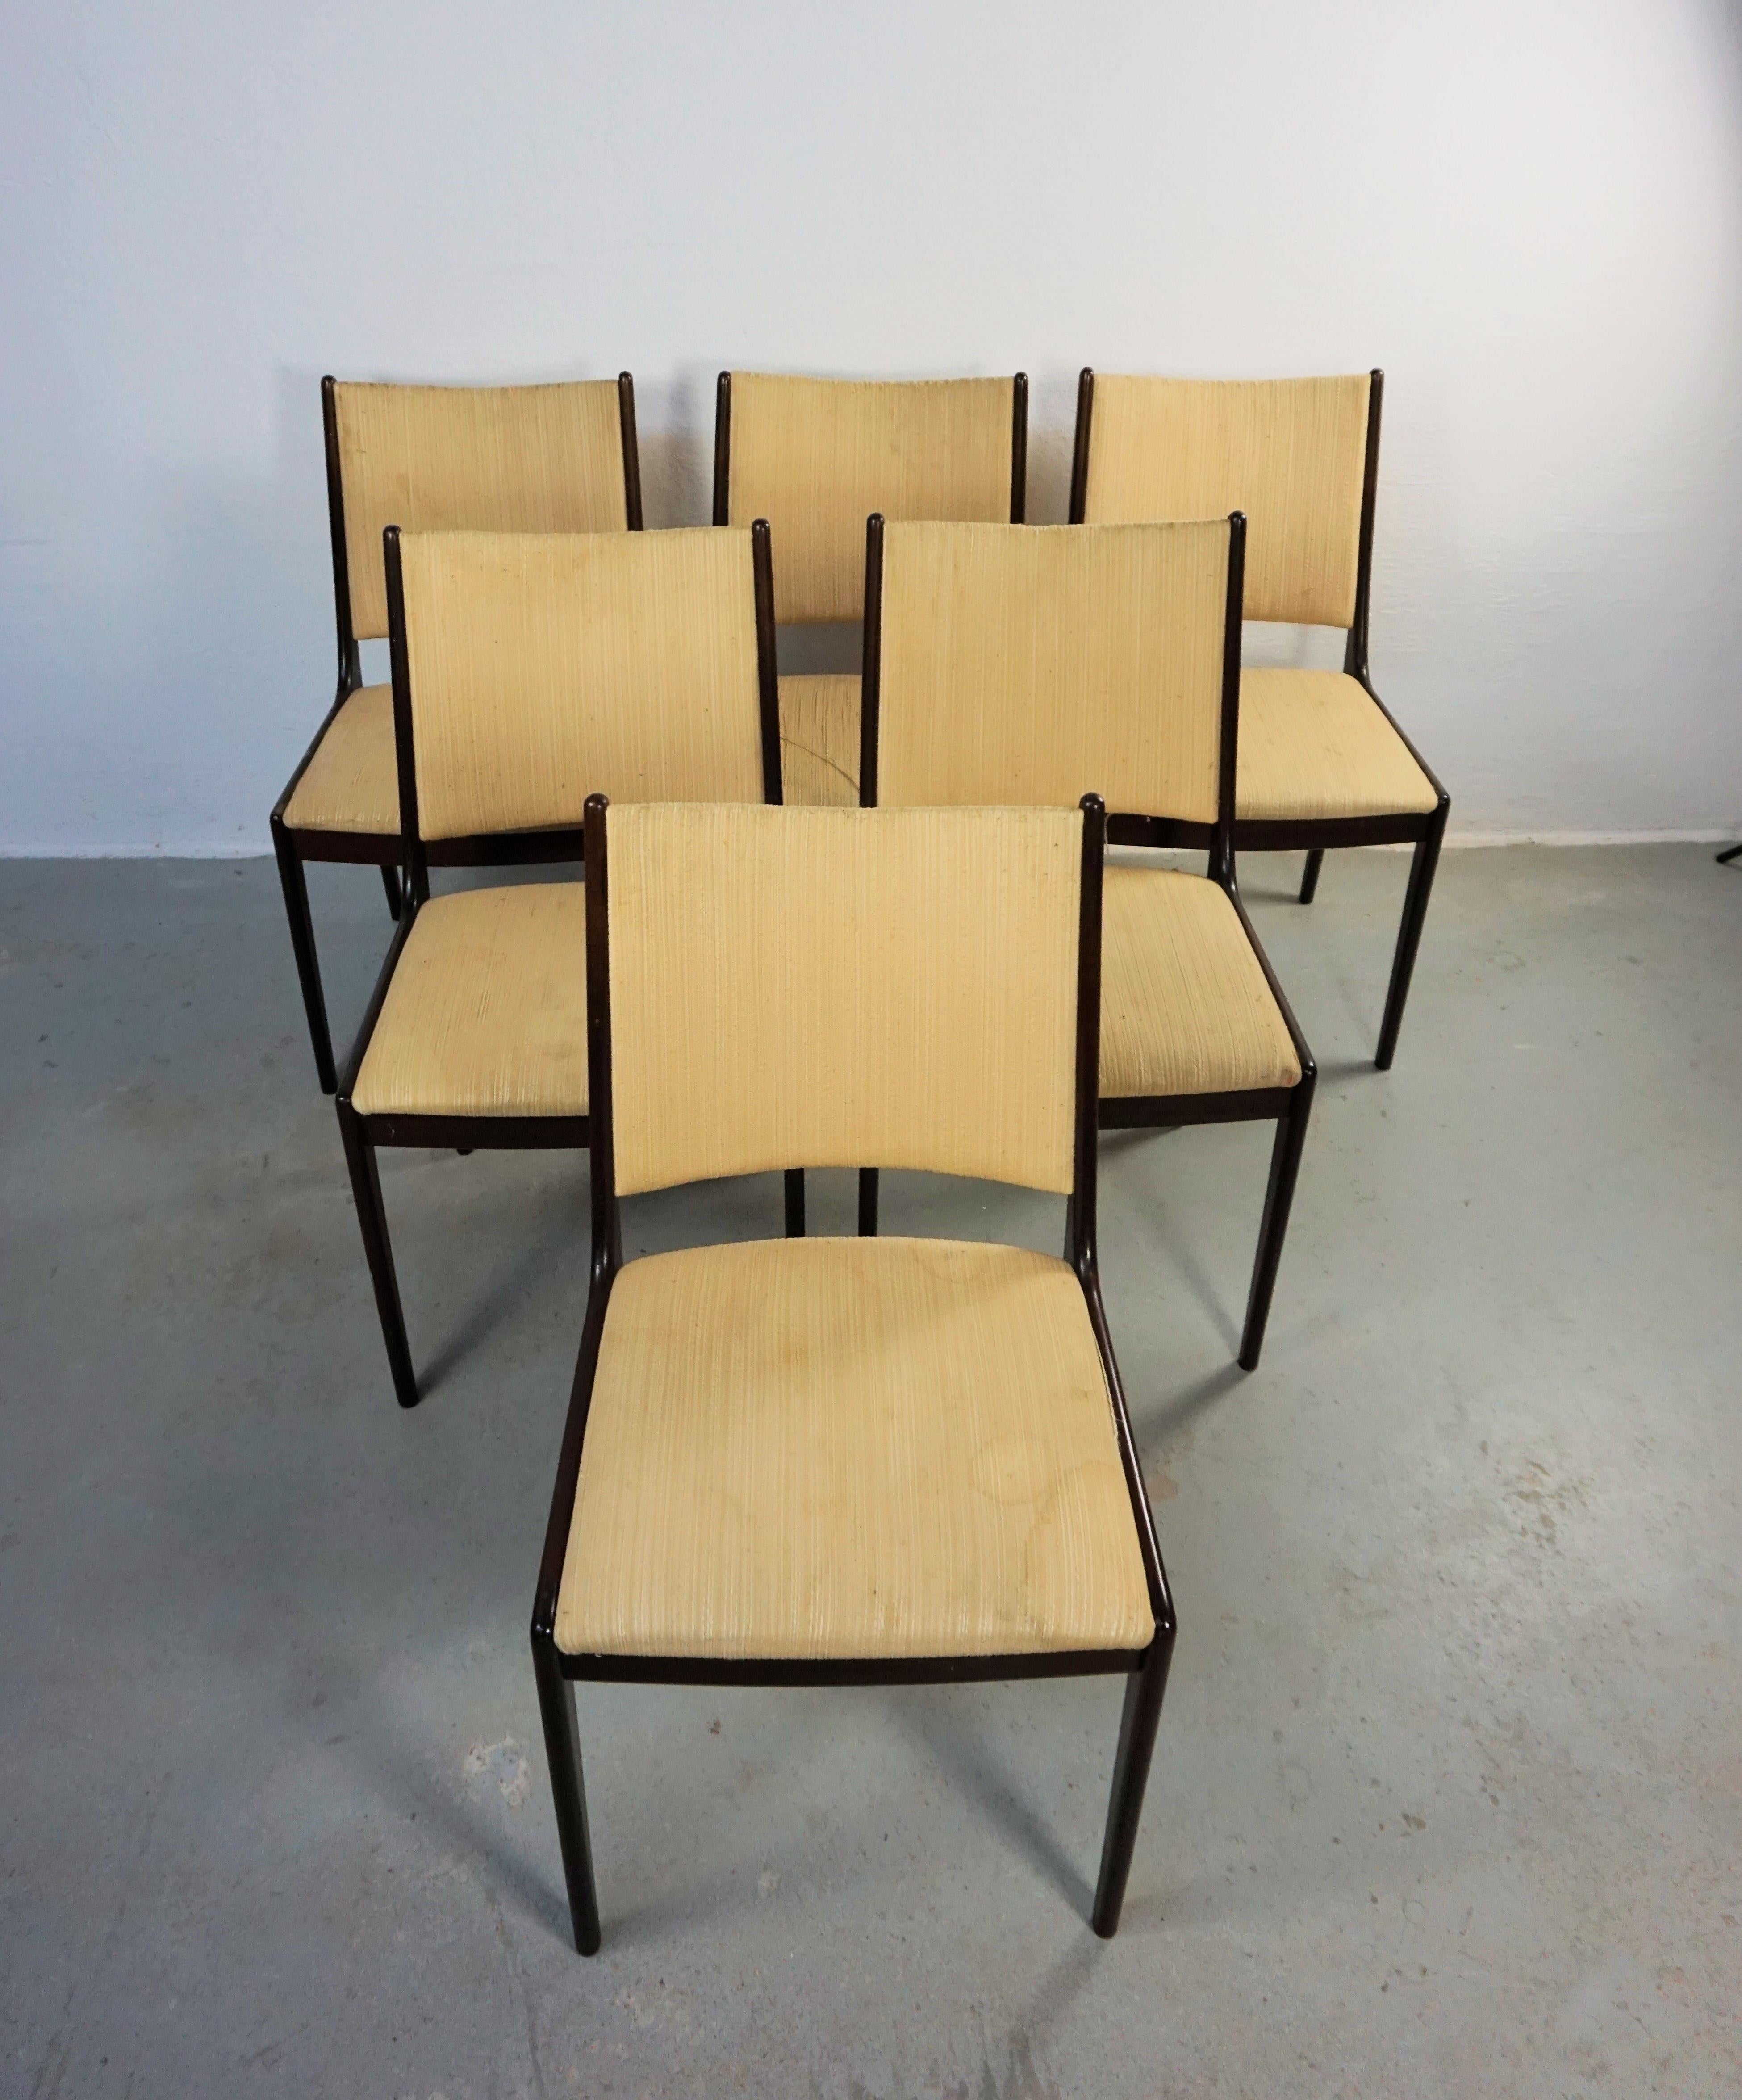 Set of six restored 1960s Johannes Andersen dining chairs in mahogany made by Uldum Møbler, Denmark including custom reupholstery.

The set of dining chairs feature a clean simple yet elegant design that will fit in well in many settings. 

The